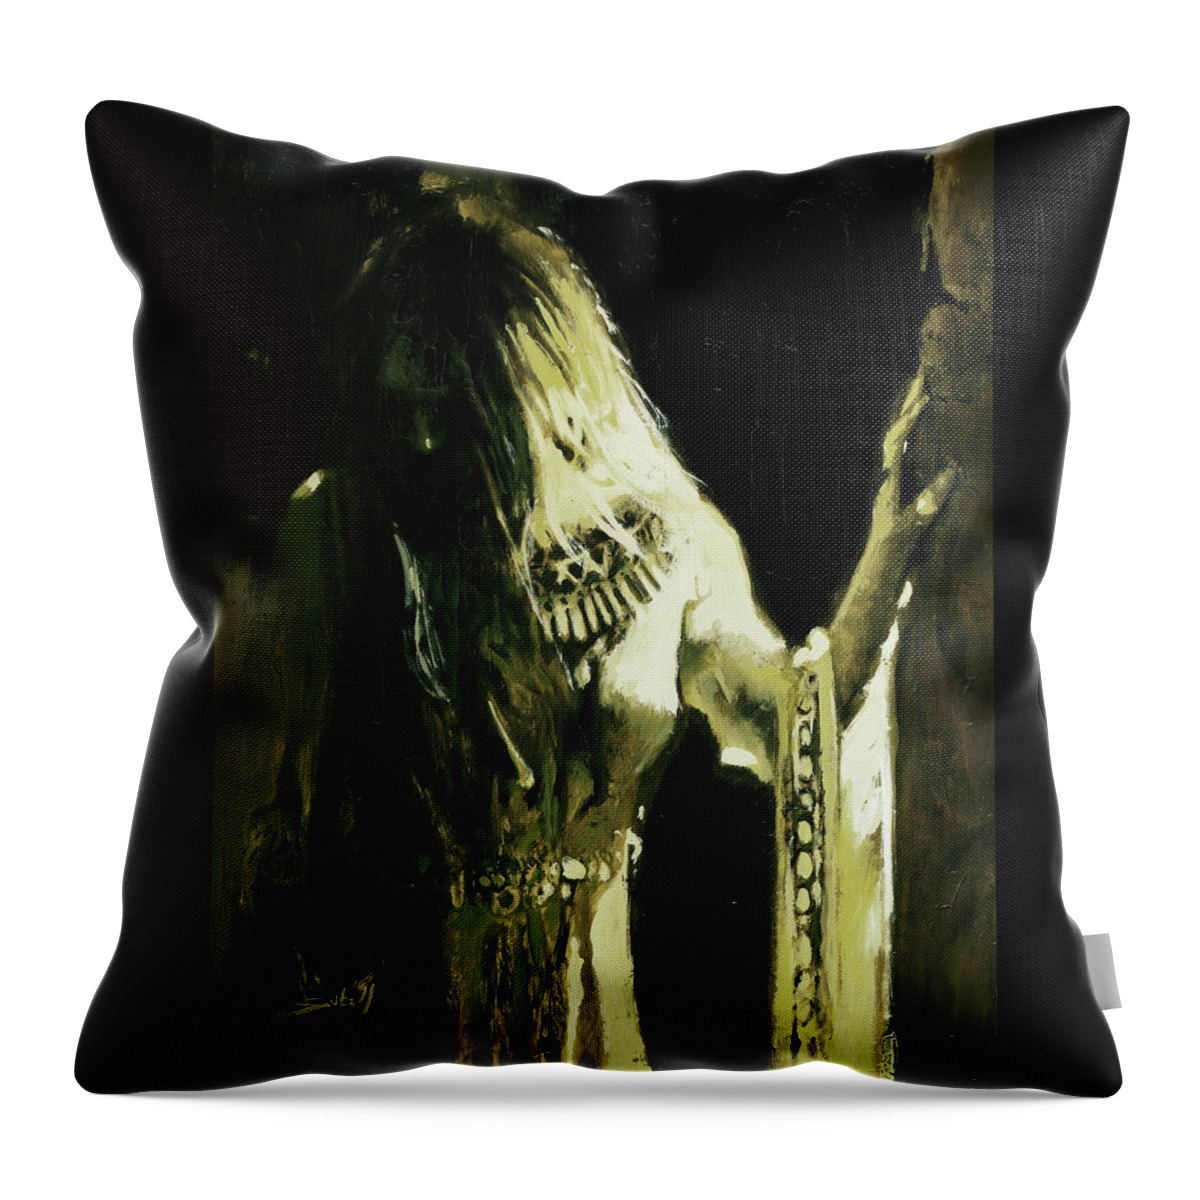 Gothic Throw Pillow featuring the painting Lost Soul by Sv Bell